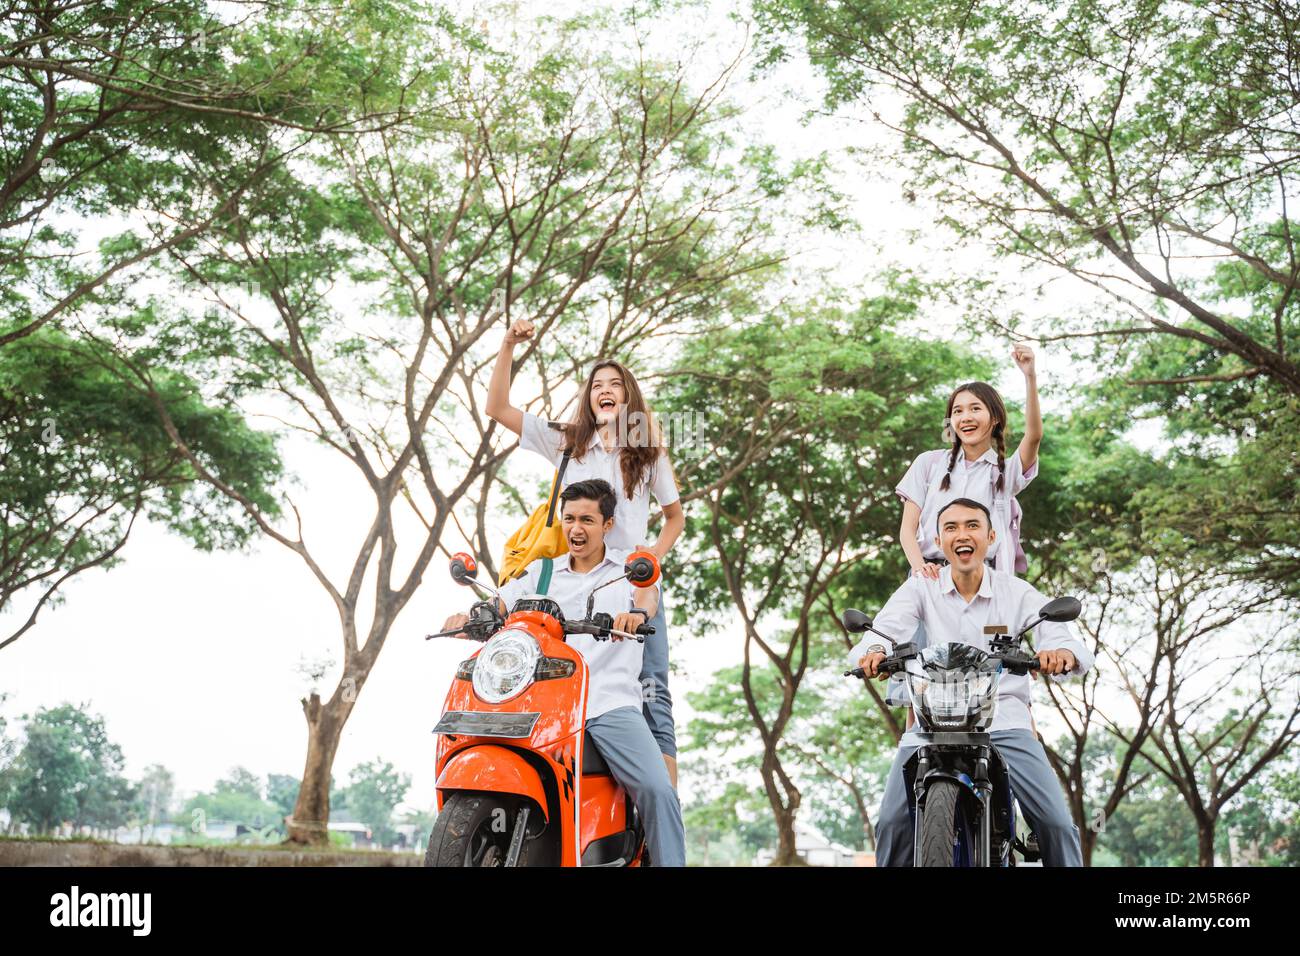 Two pairs of high school students riding reckless motorbikes Stock Photo